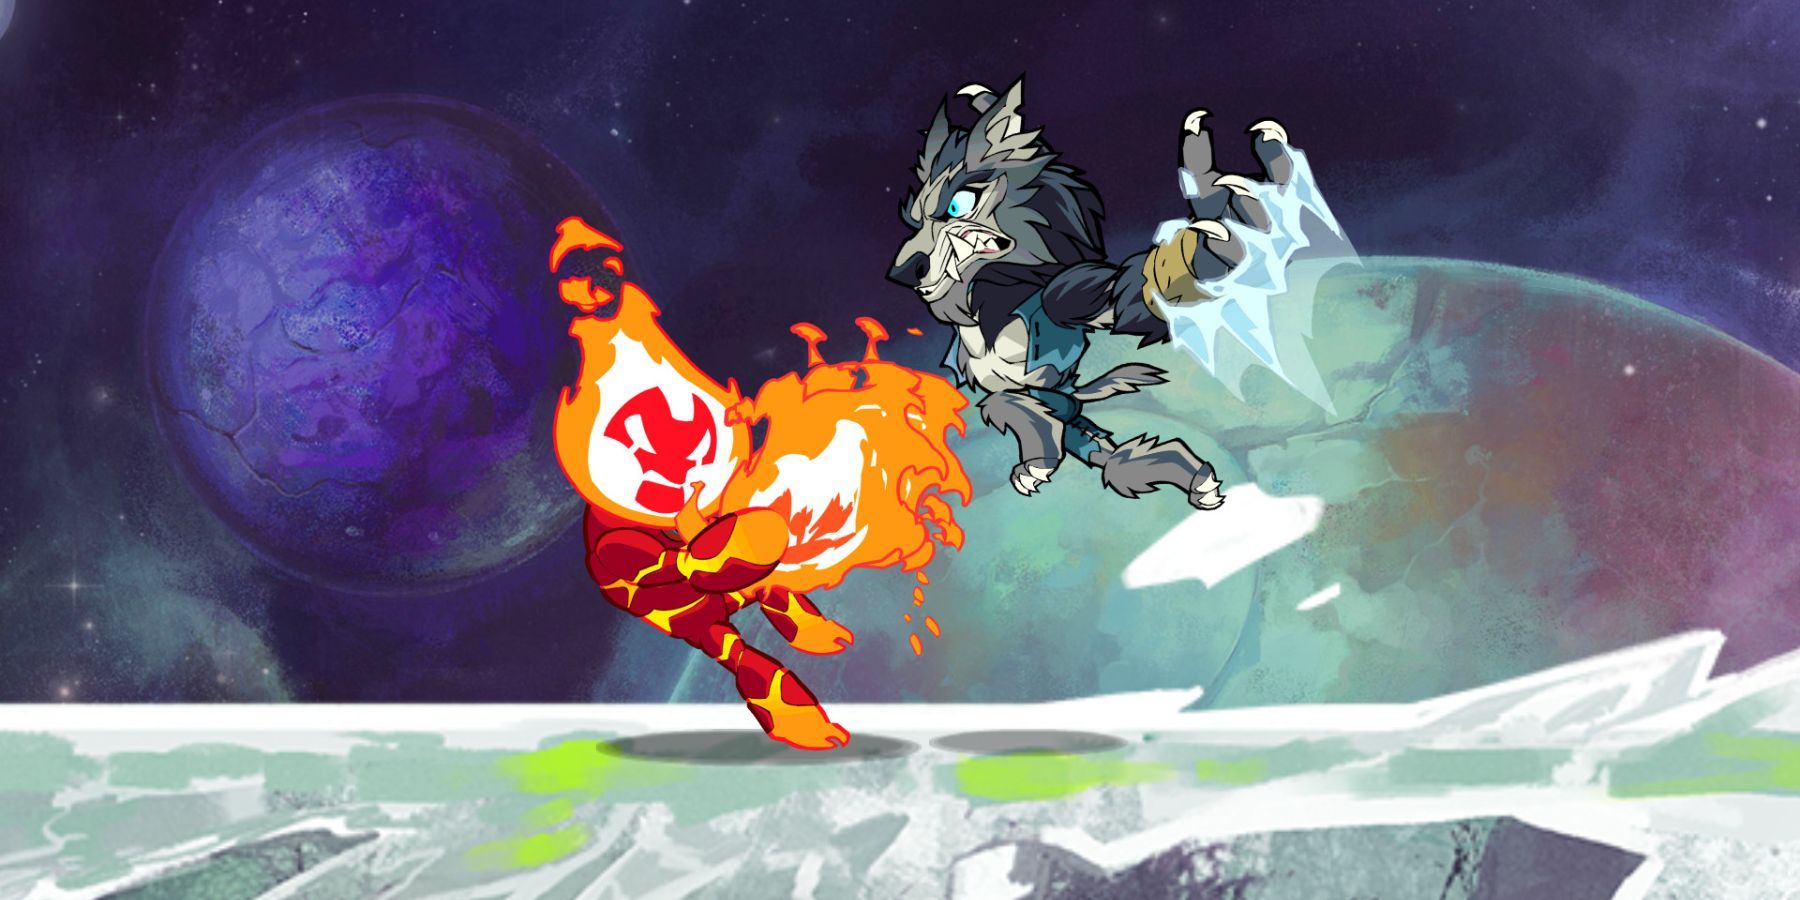 Brawlhalla two characters are fighting